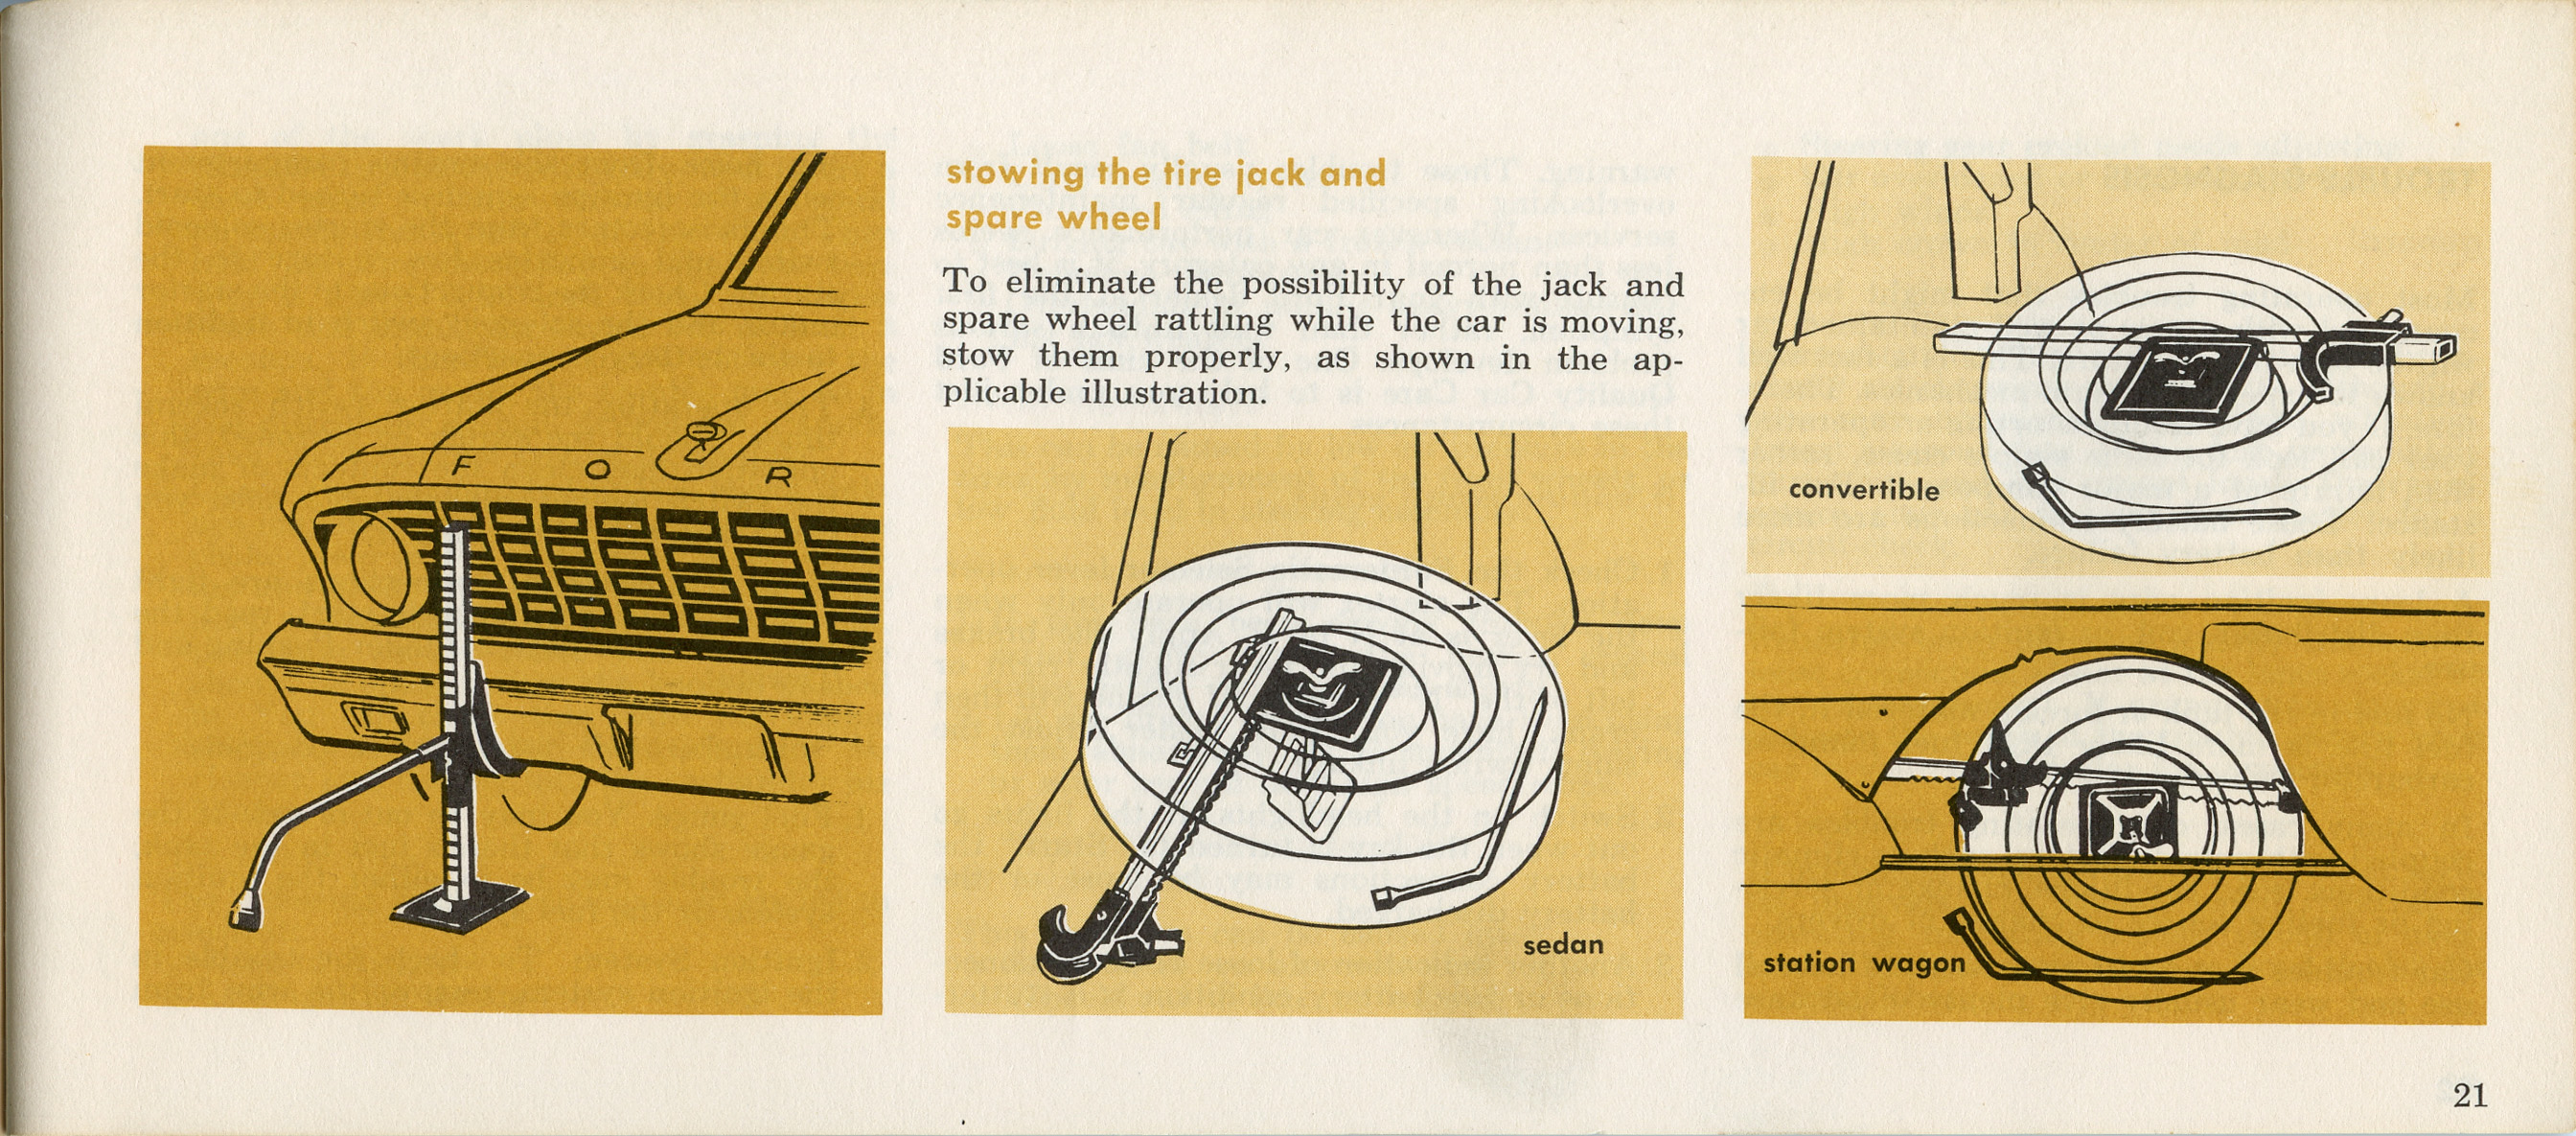 1964_Ford_Falcon_Owners_Manual-21